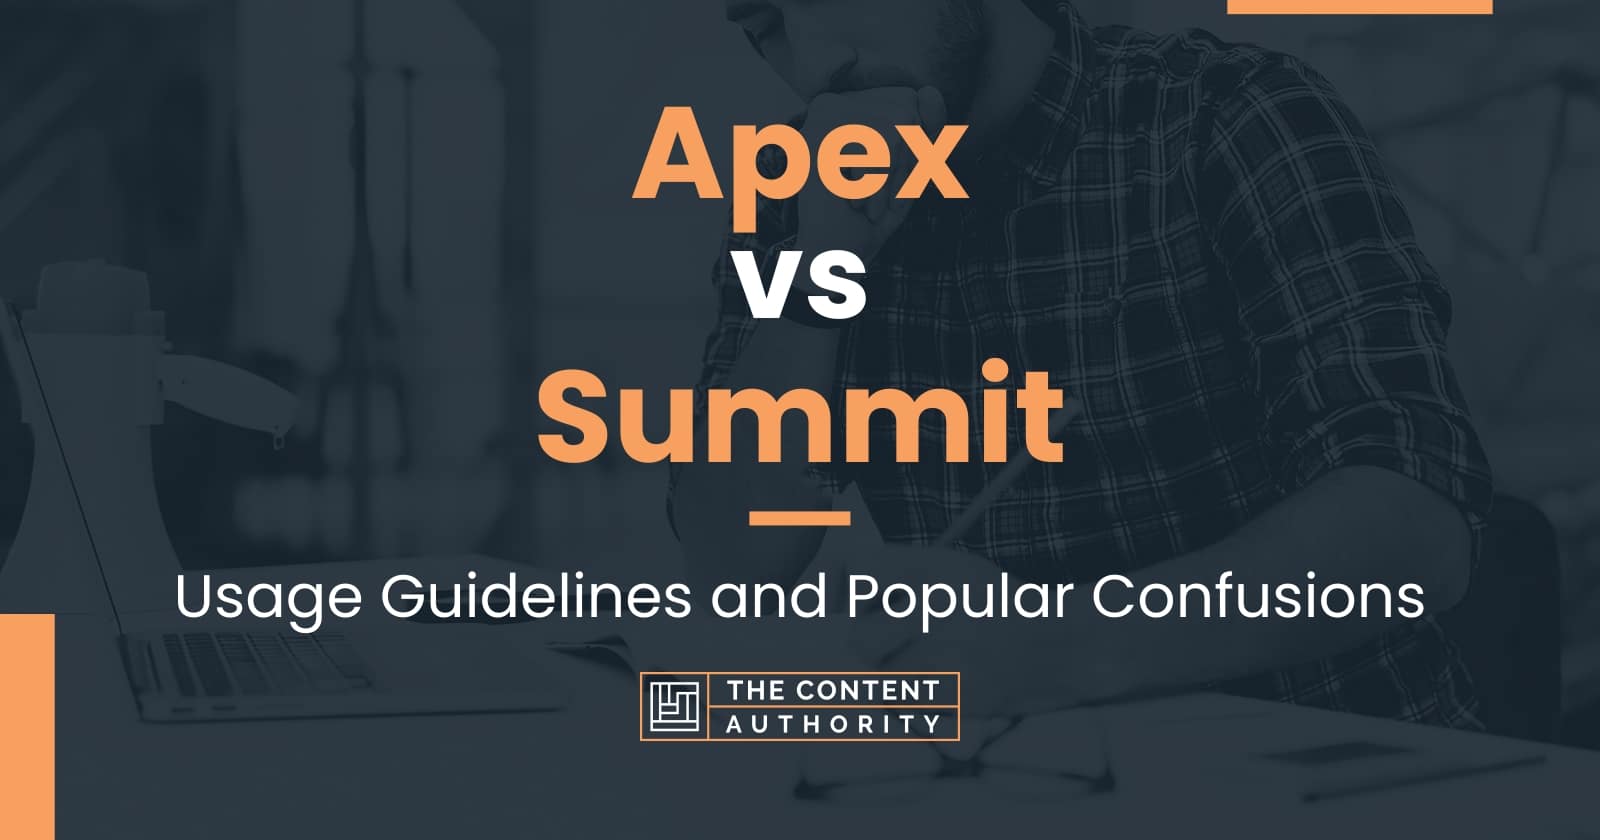 Apex vs Summit Usage Guidelines and Popular Confusions